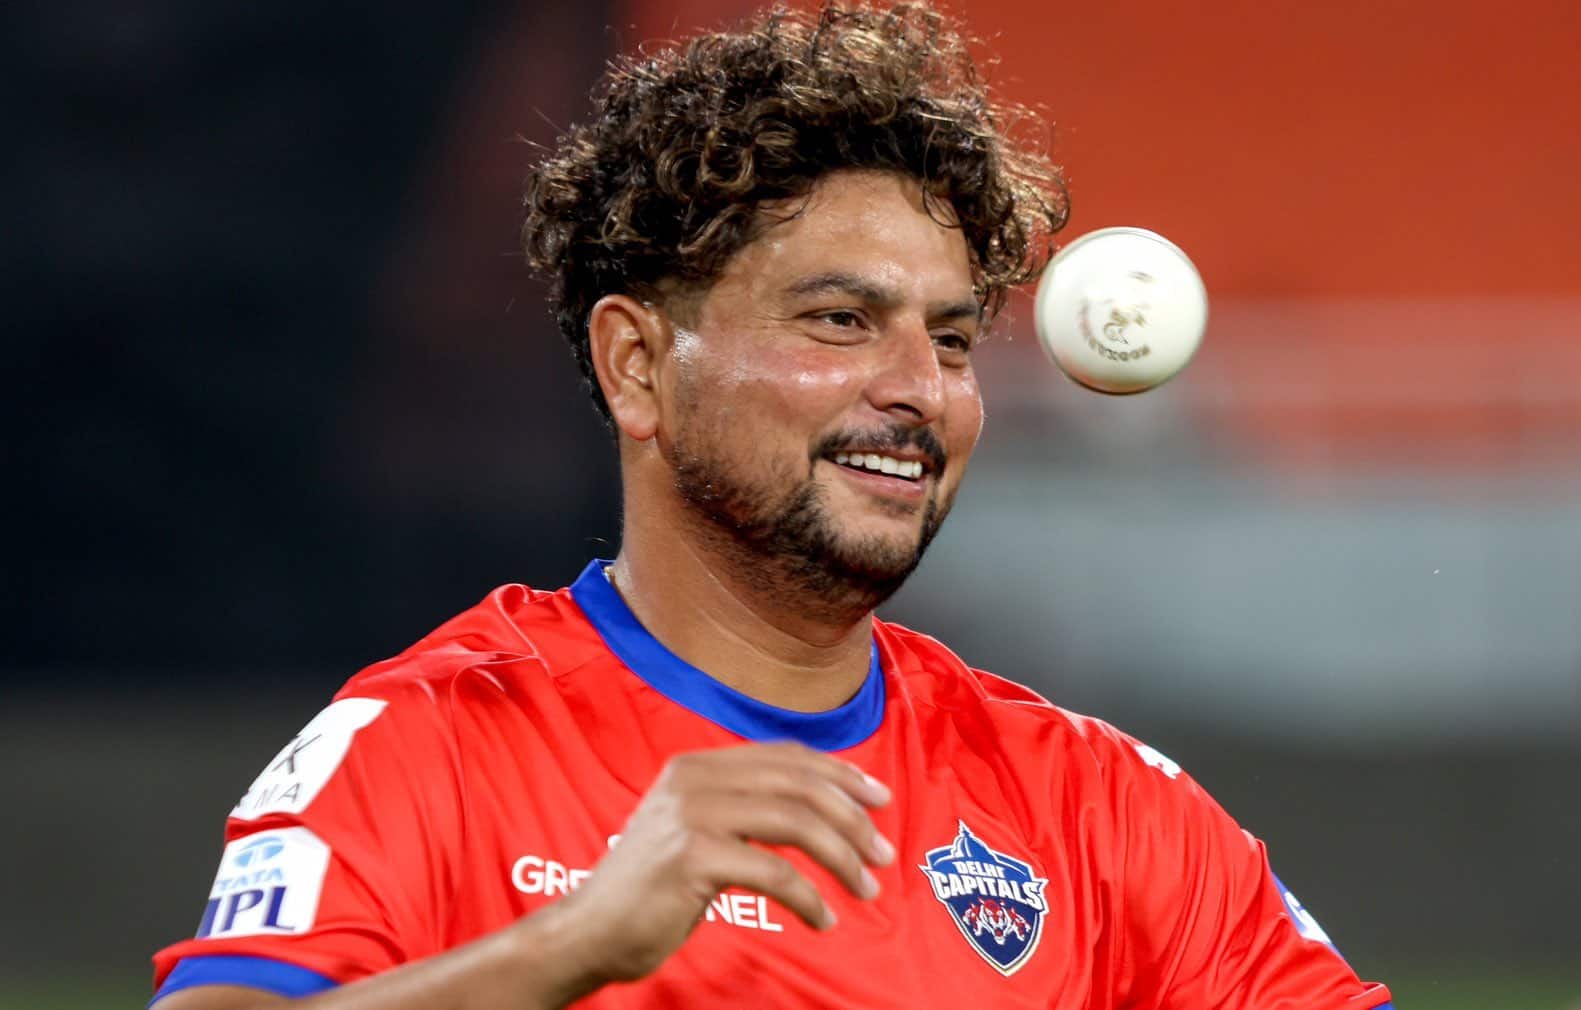 Kuldeep Yadav can be a game changer for the Delhi Capitals [X]